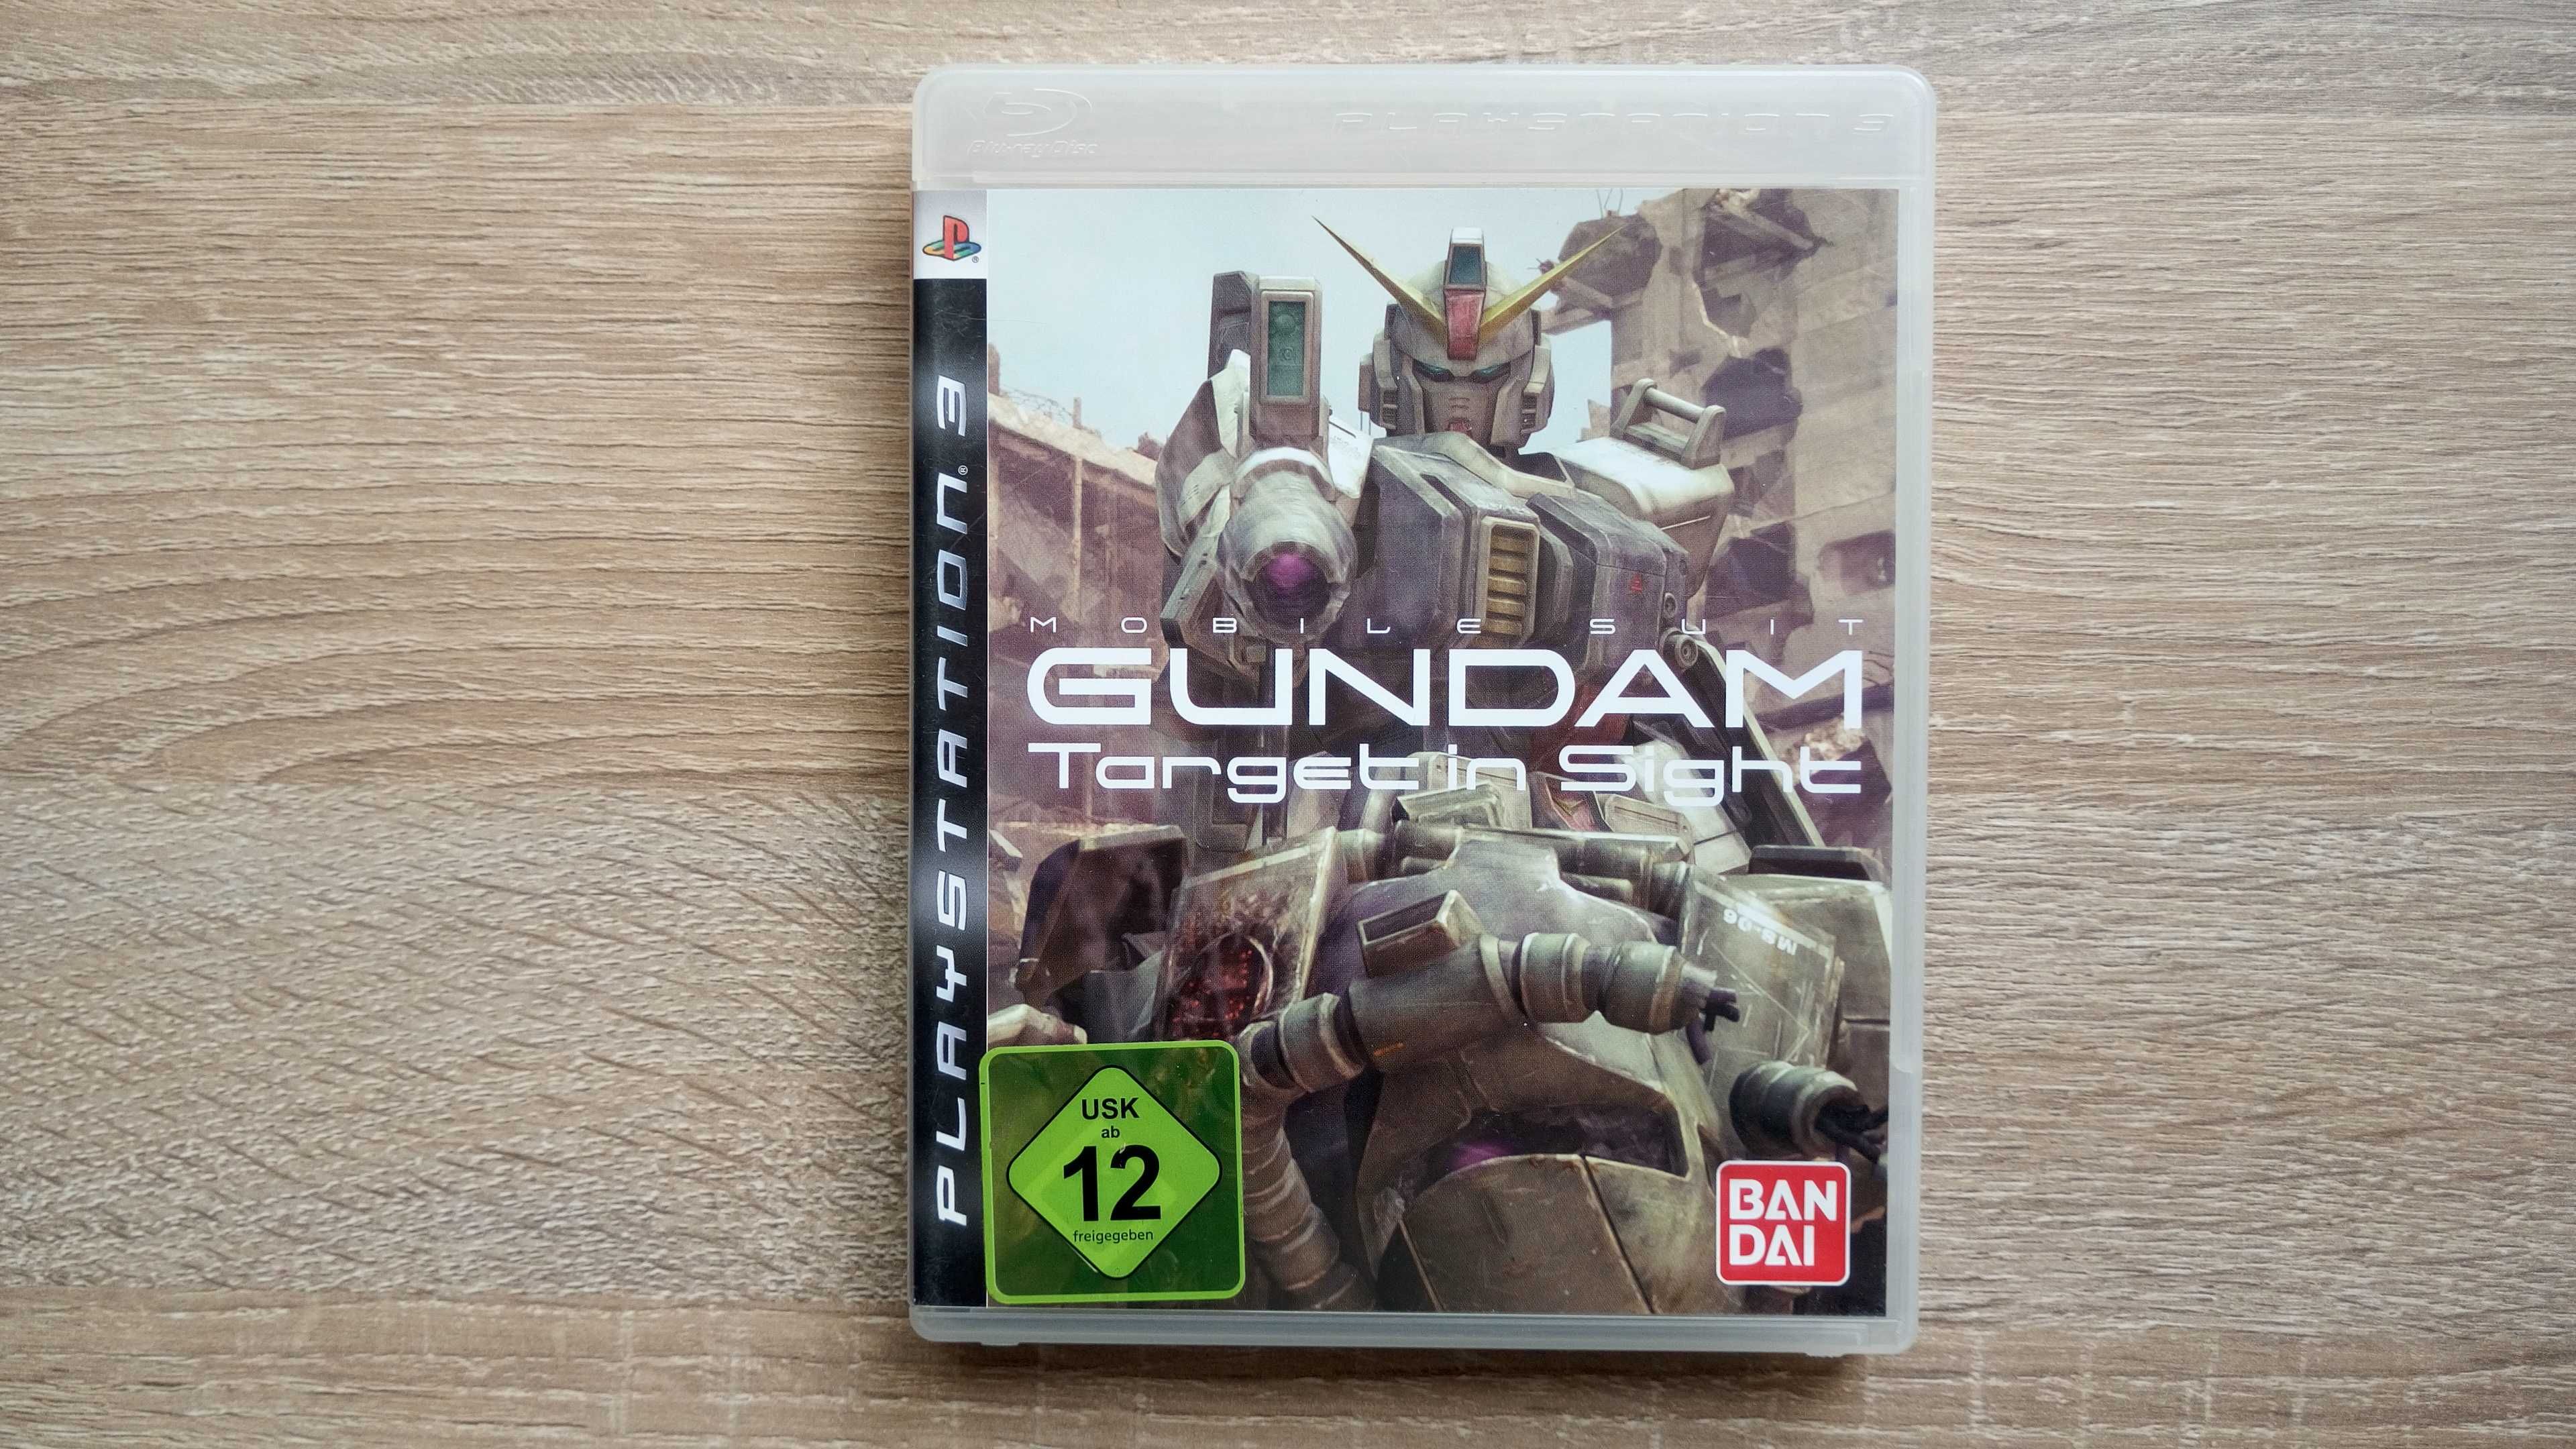 Vand Mobile Suit Gundam Target in Sight PS3 Play Station 3